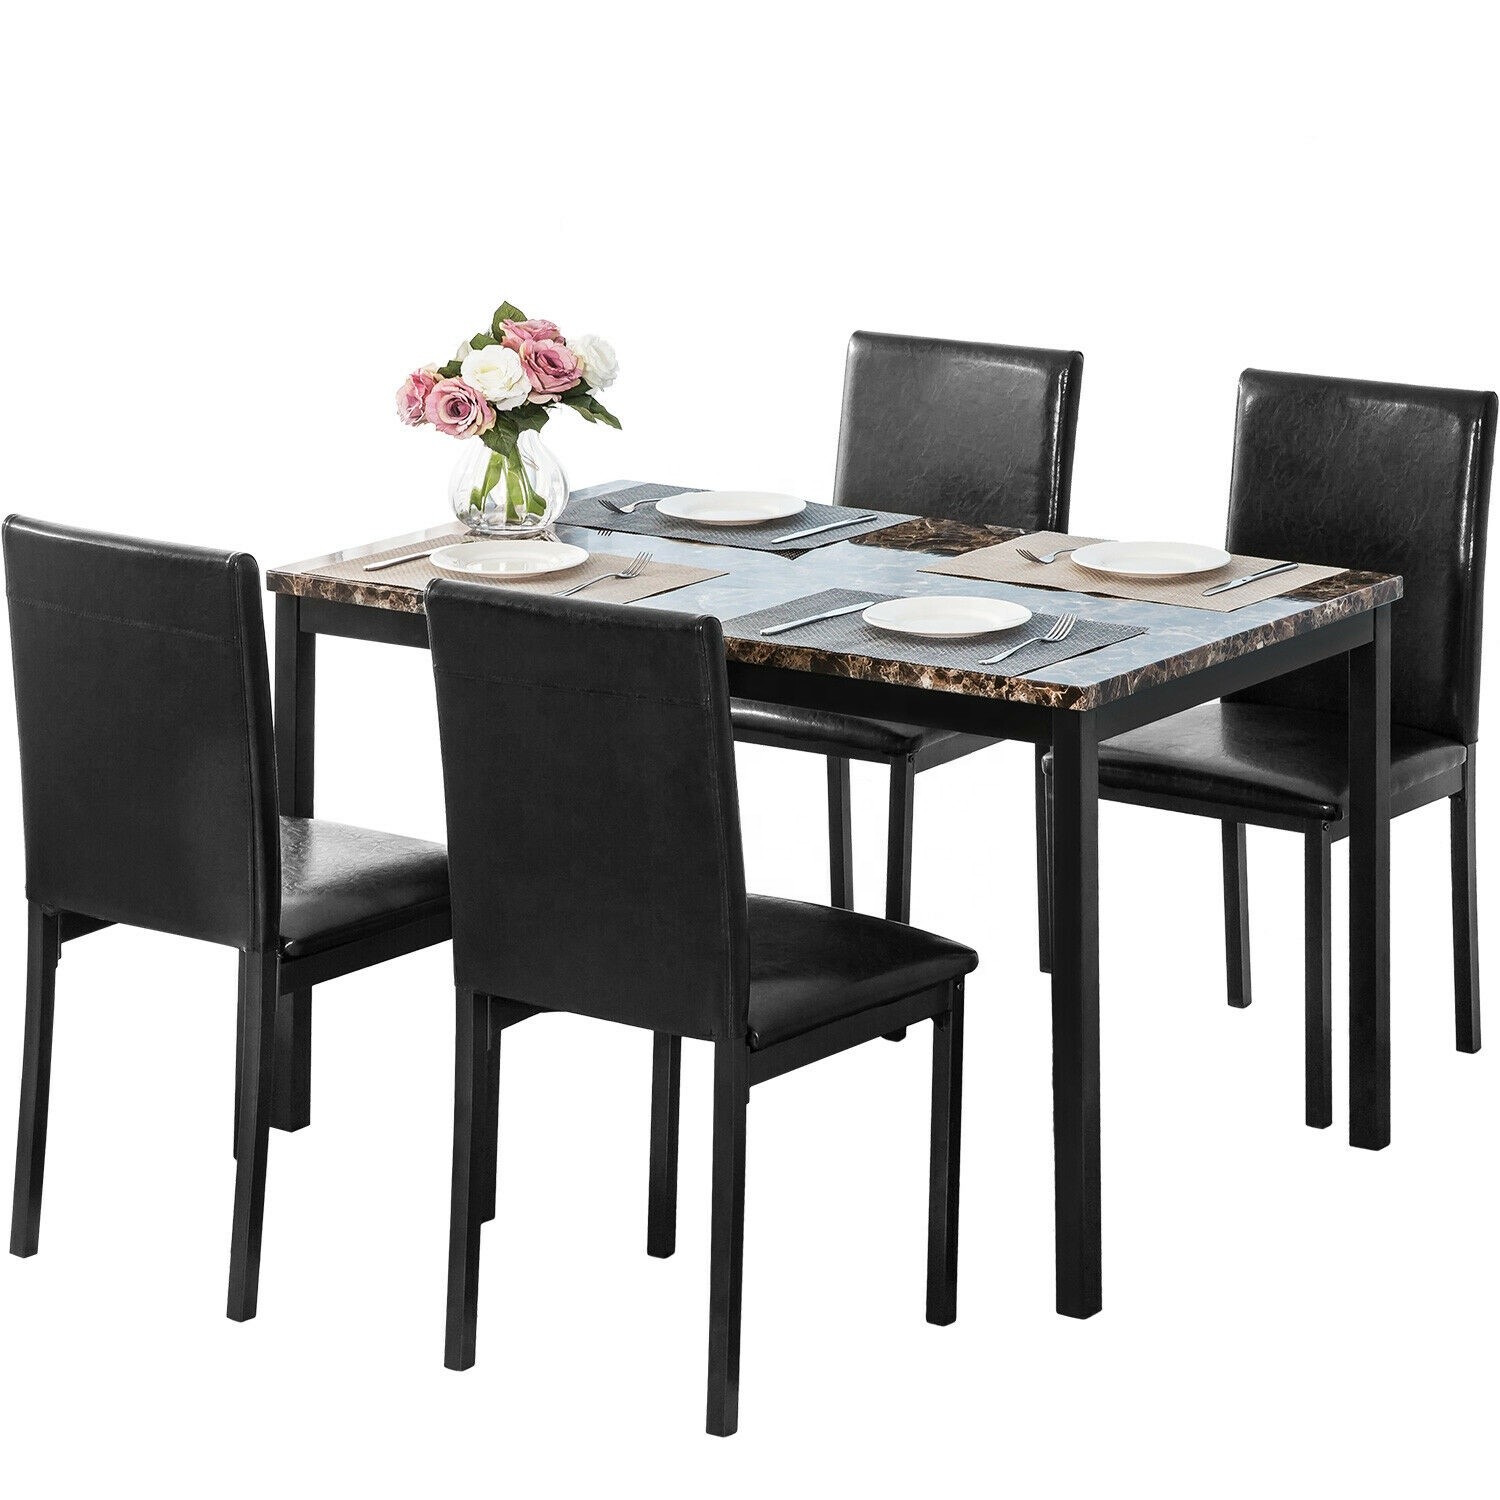  SNUGLANE Breadth 620mm Wicker Indoor Dining Set With Marble Top Manufactures